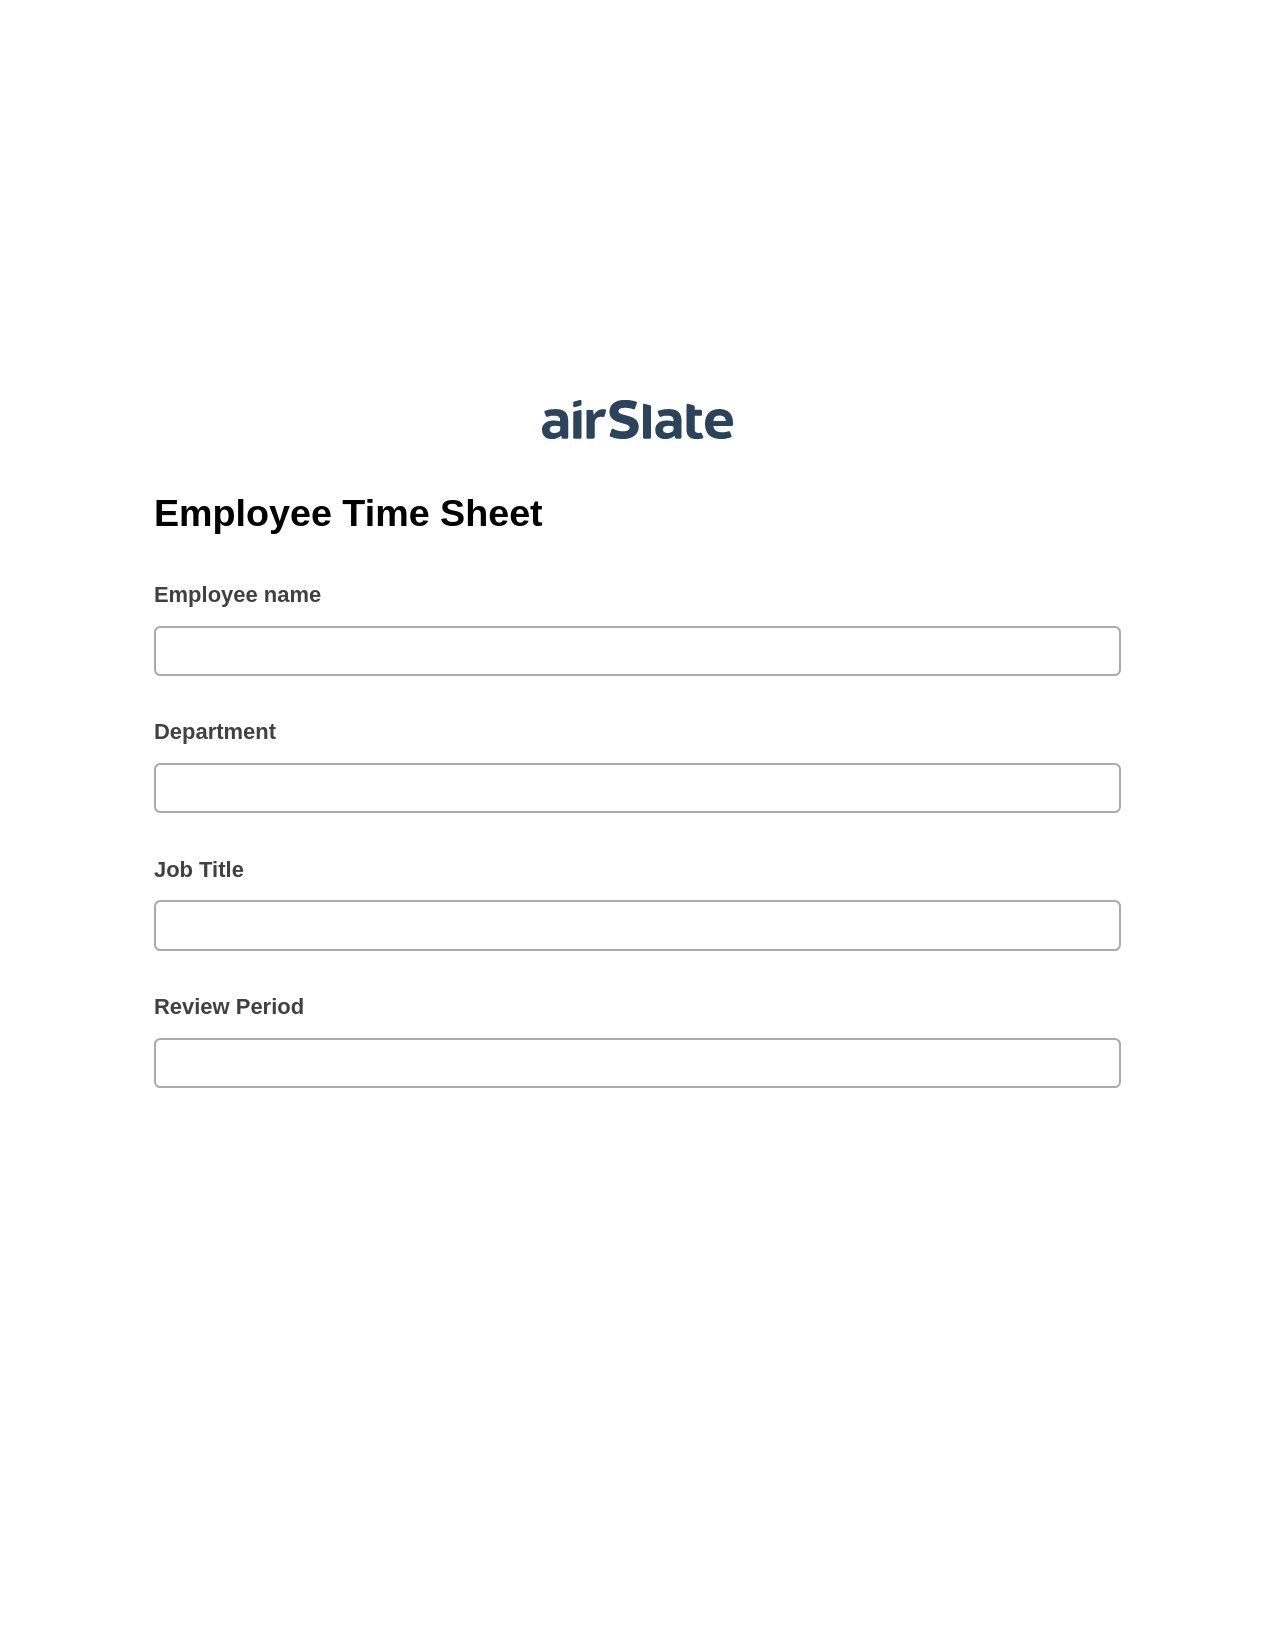 Employee Time Sheet Pre-fill Document Bot, Remove Tags From Slate Bot, Export to MySQL Bot